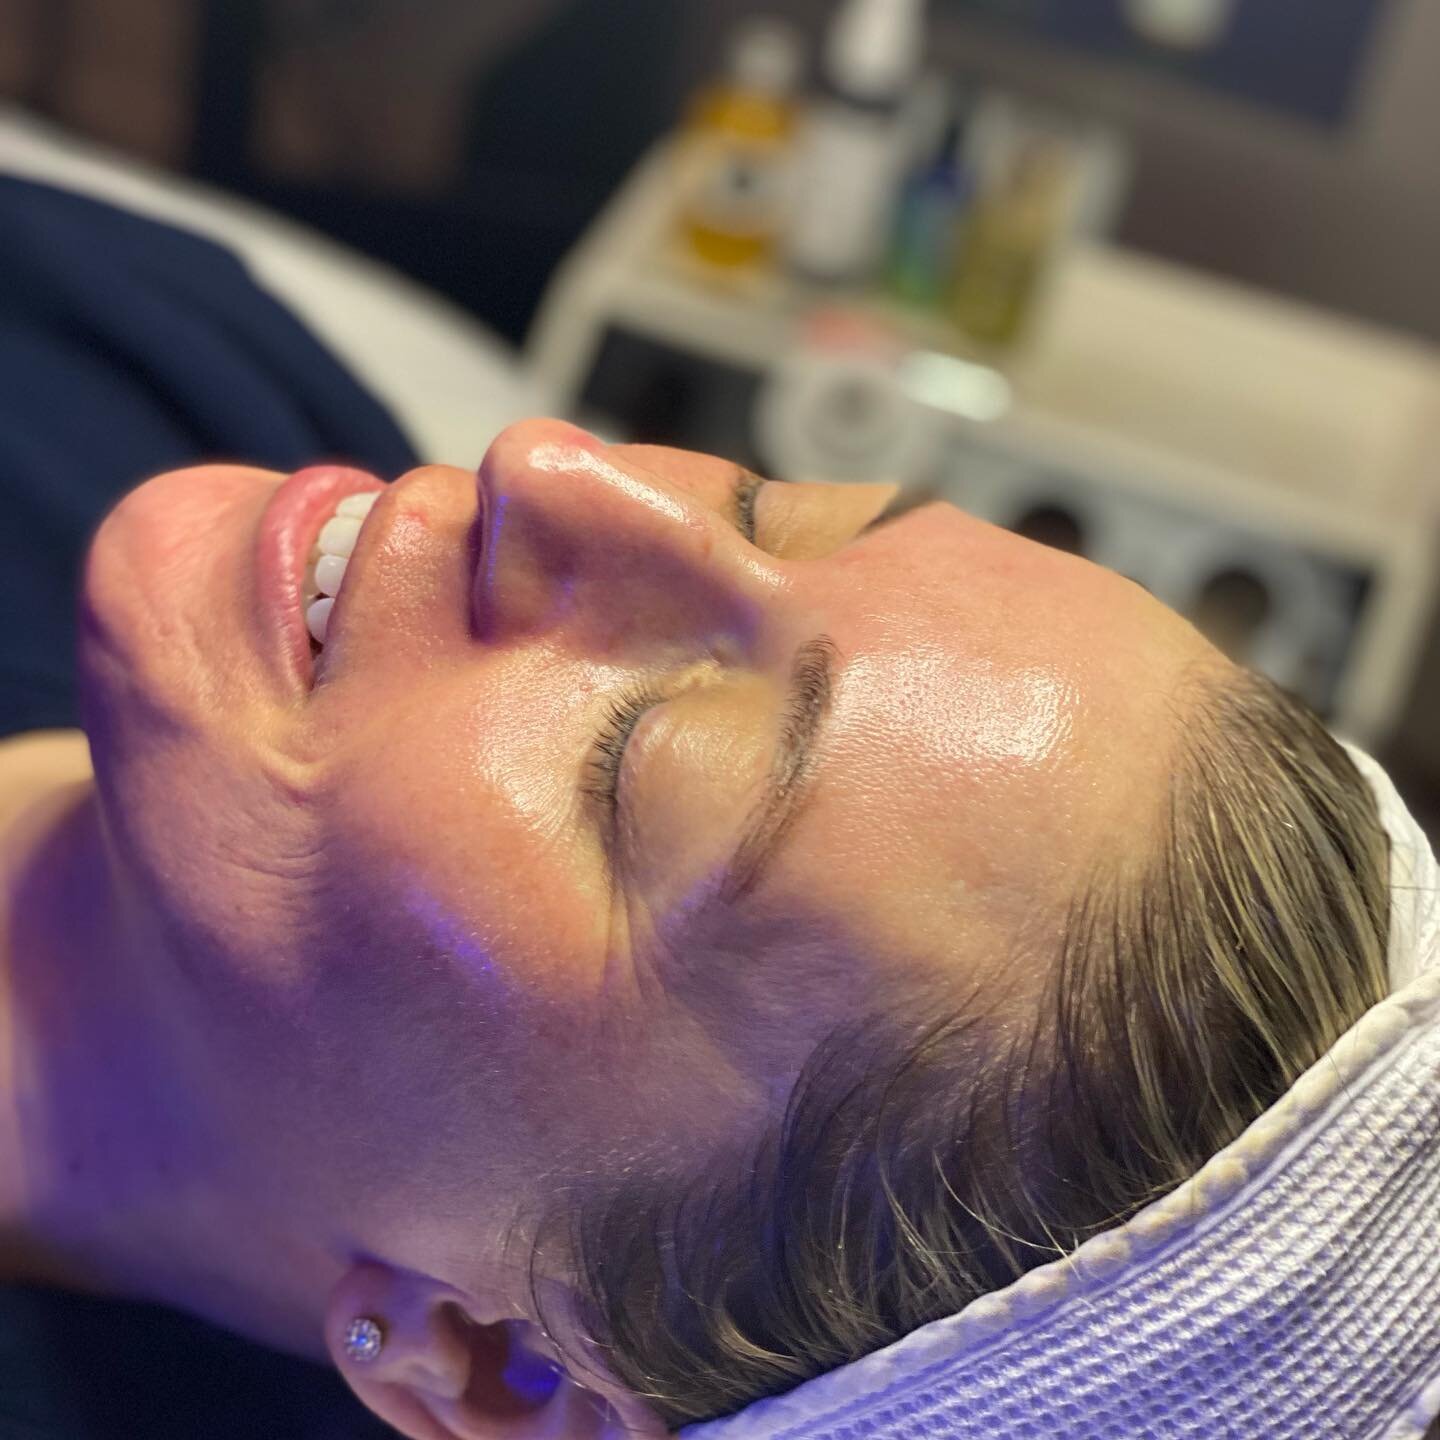 ✨All the smiles after GLoW Up! Beautiful healthy skin!✨DM me with any questions or inquiries! All scheduling is done online at www.soffittaskincare.com - NEW days &amp; times available!✨ @soffittaskincare @jessica.mayo #soffitta #soffittaskincare #so